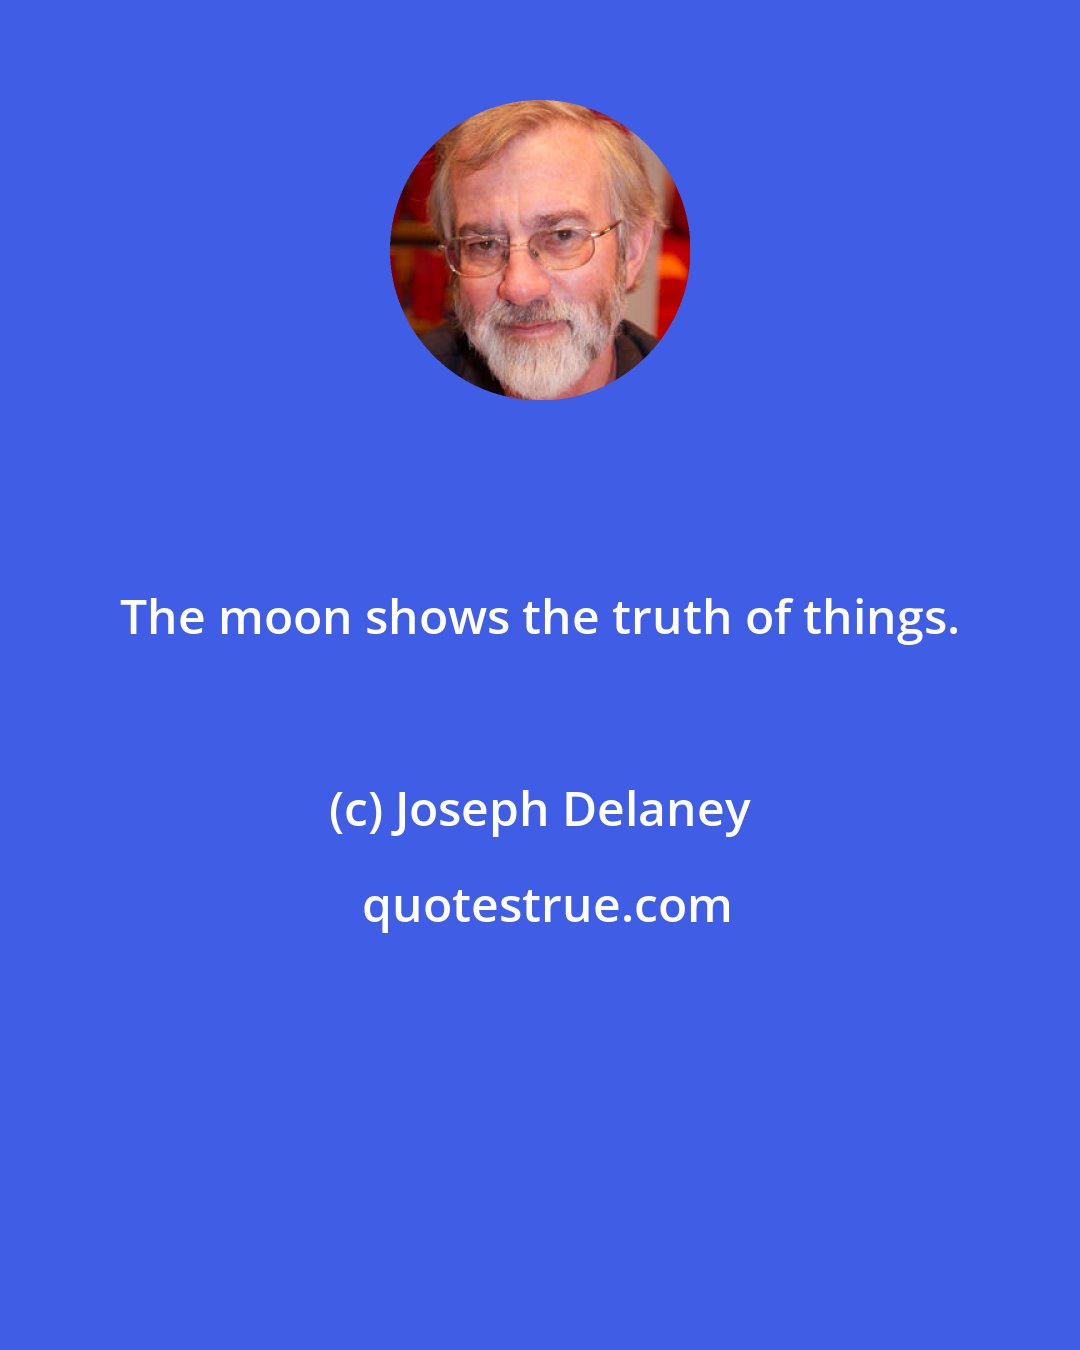 Joseph Delaney: The moon shows the truth of things.